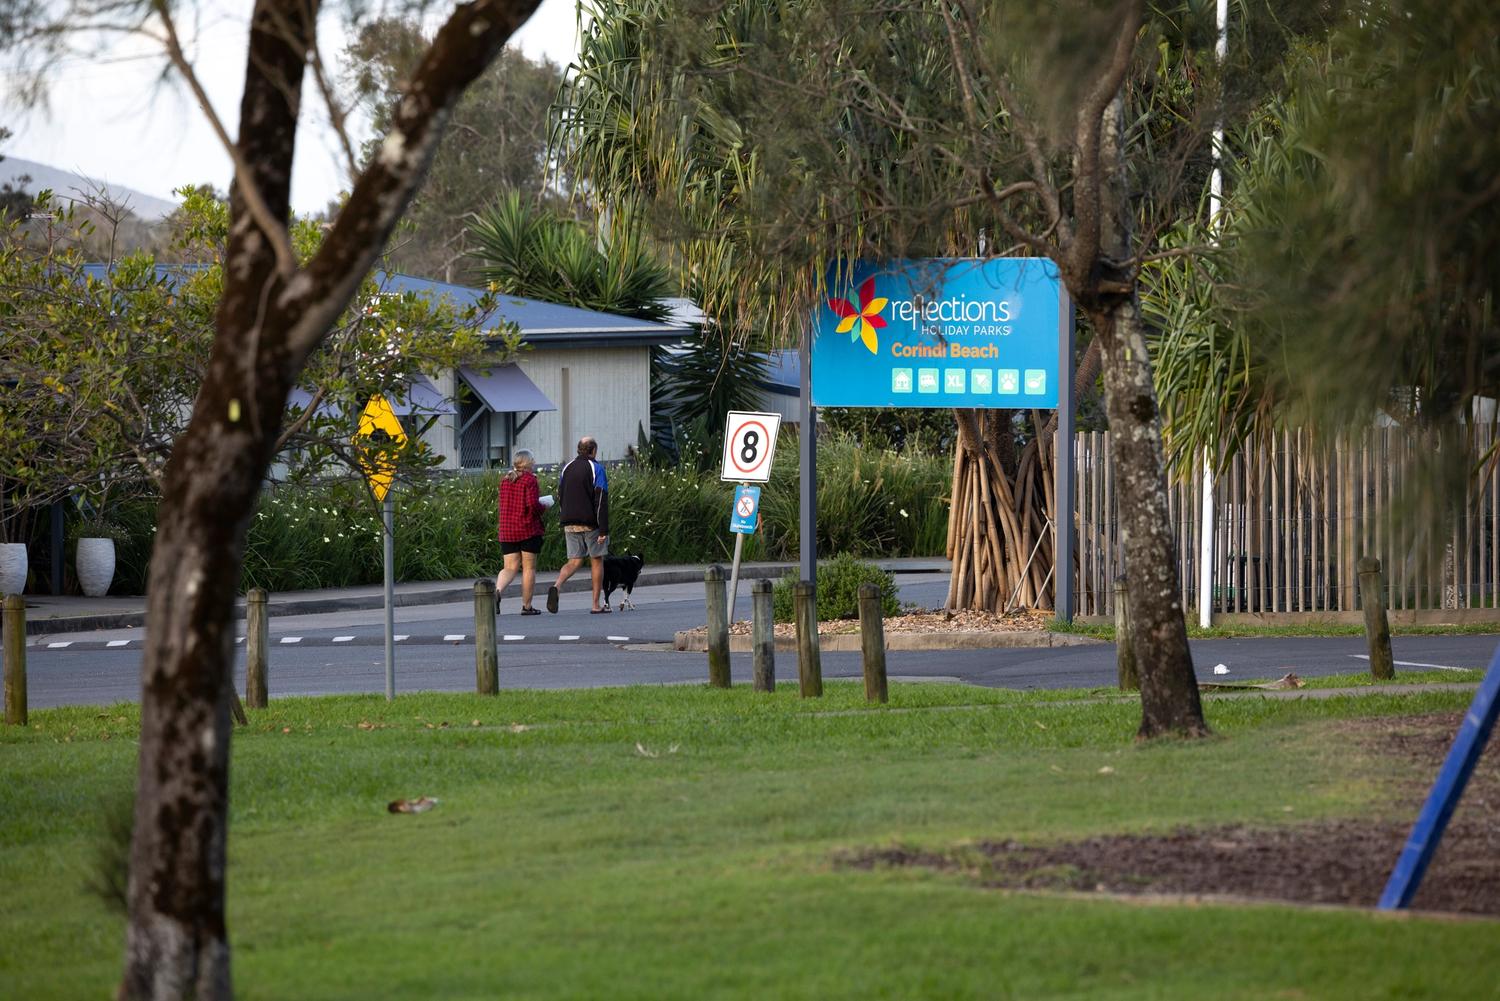 People walking too available kiosks at a reflections holiday park